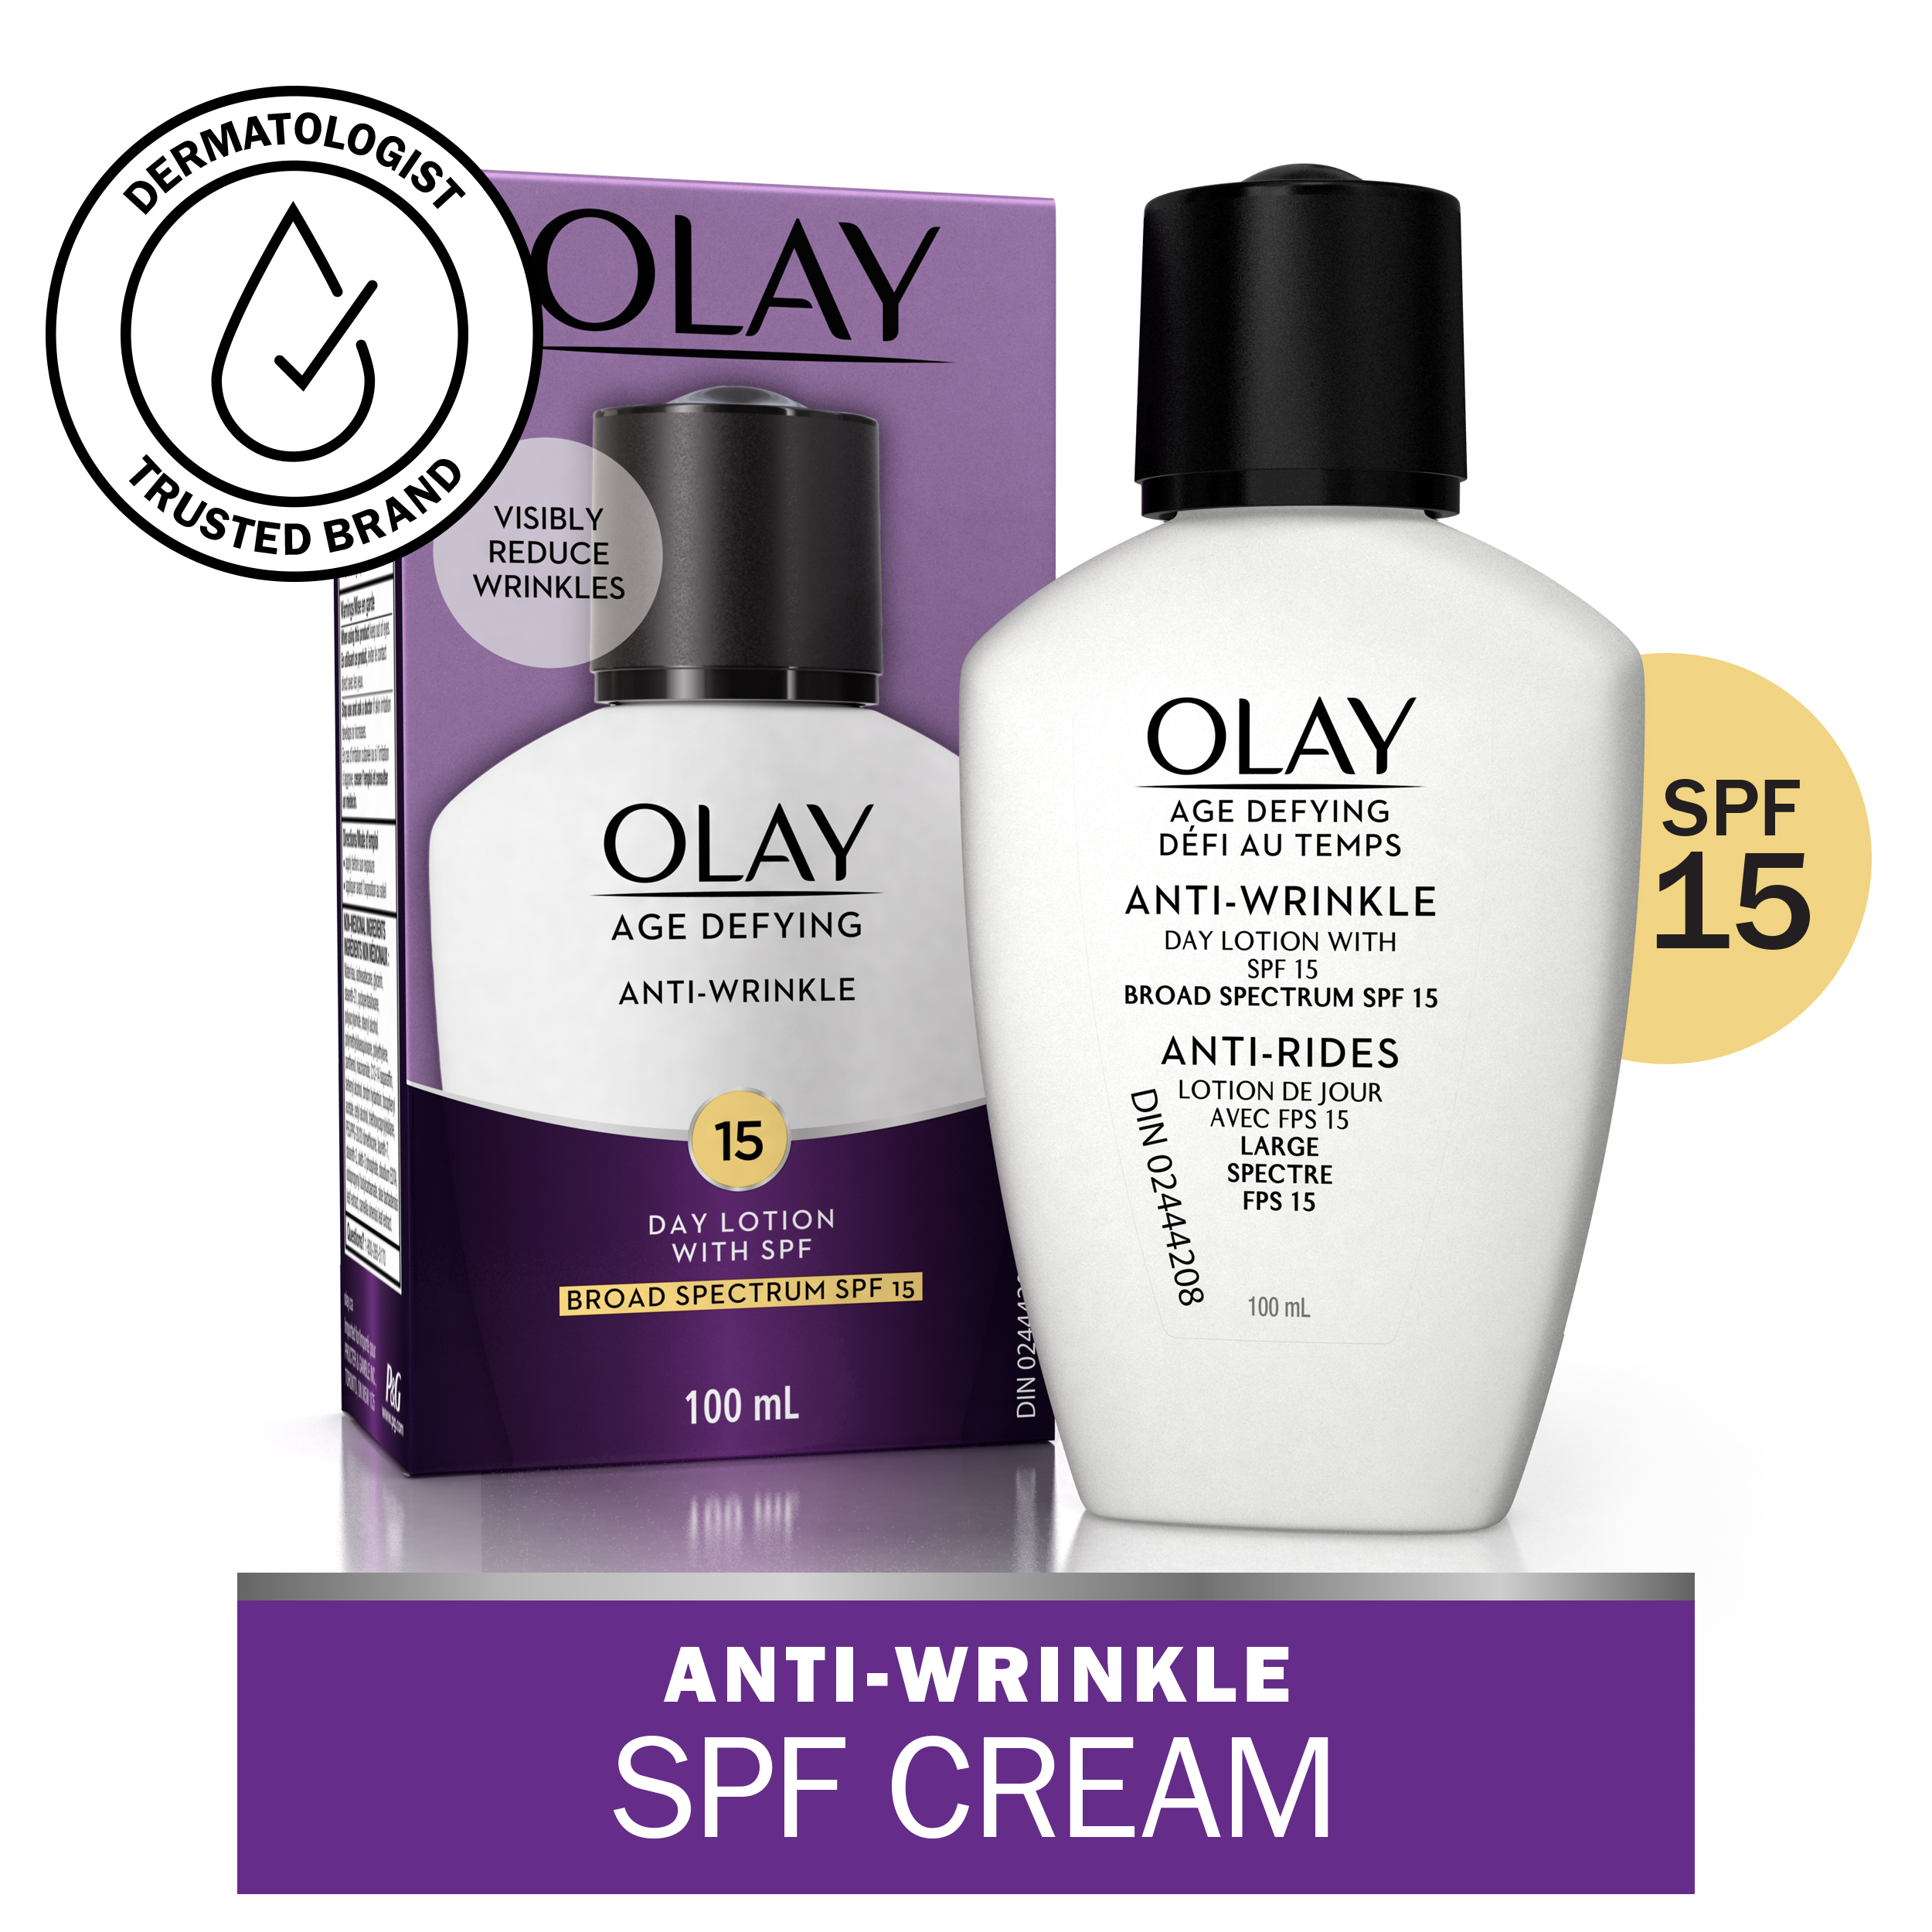 Olay Age Defying Anti-Wrinkle Day Face Lotion with Sunscreen SPF 15, For All Skin Types, 3.4 fl oz - image 1 of 8